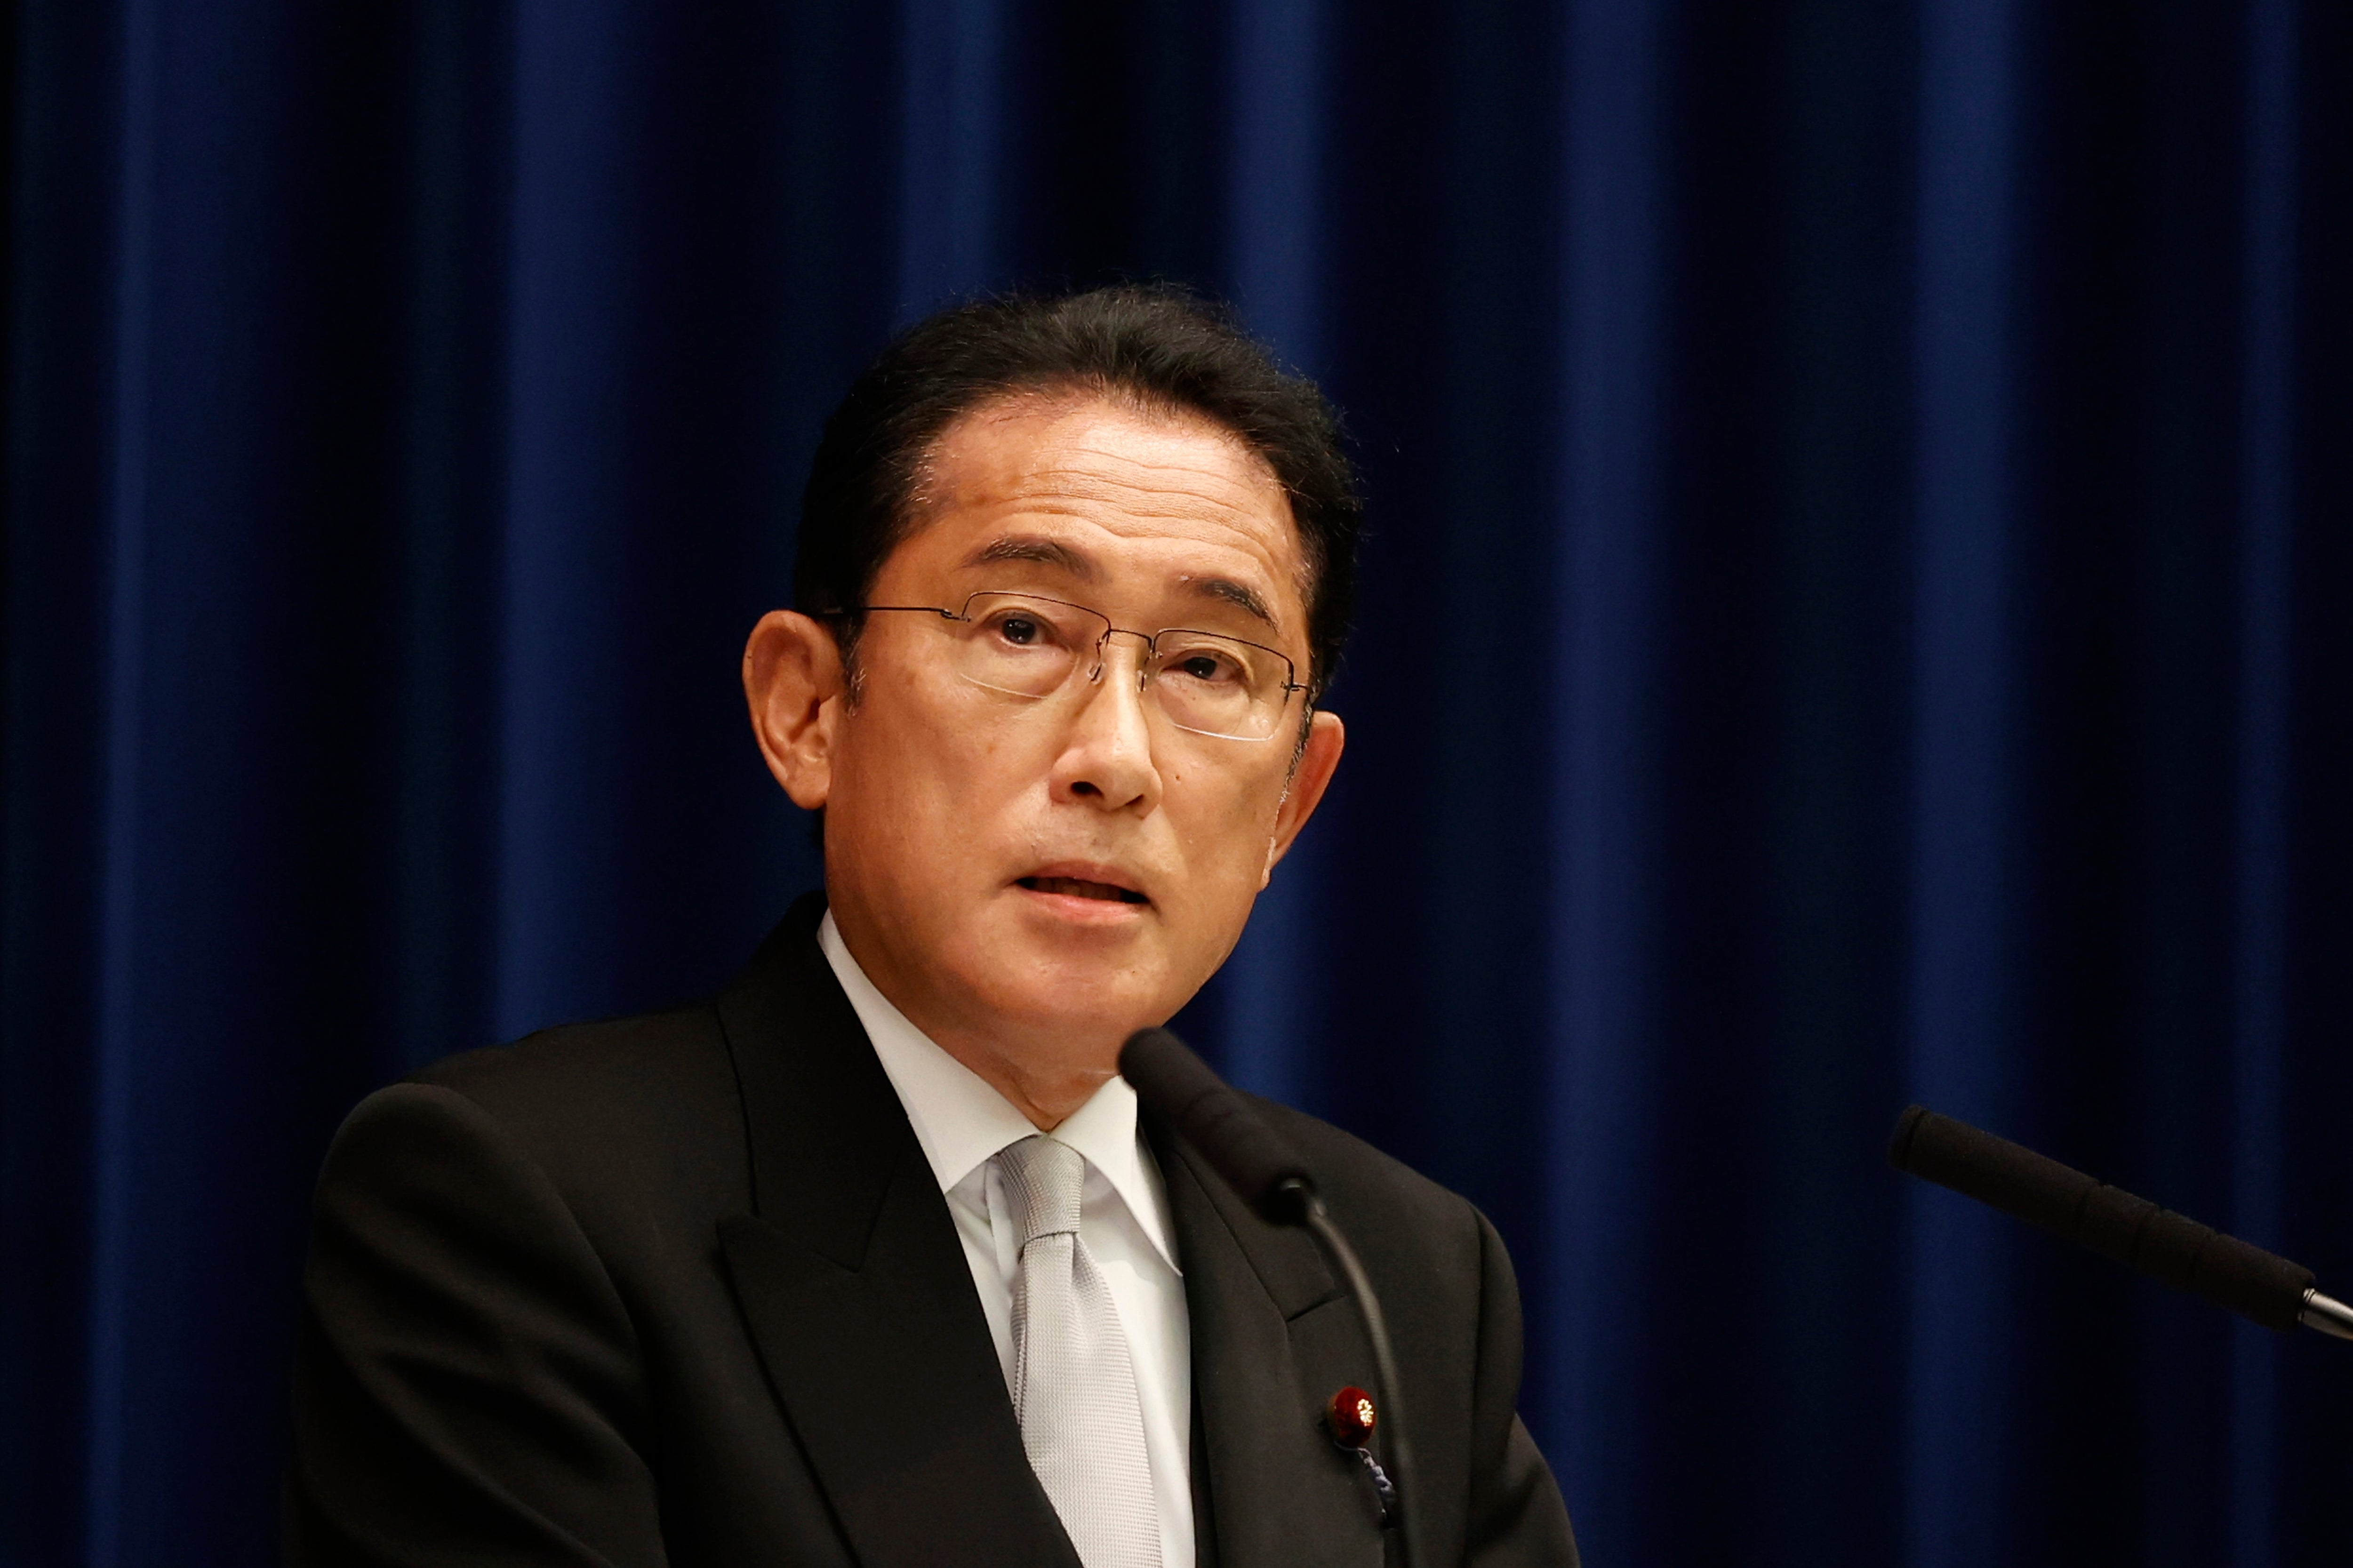 Japanese prime minister Fumio Kishida speaks during a press conference at the prime minister's official residence in Tokyo on 10 August 2022